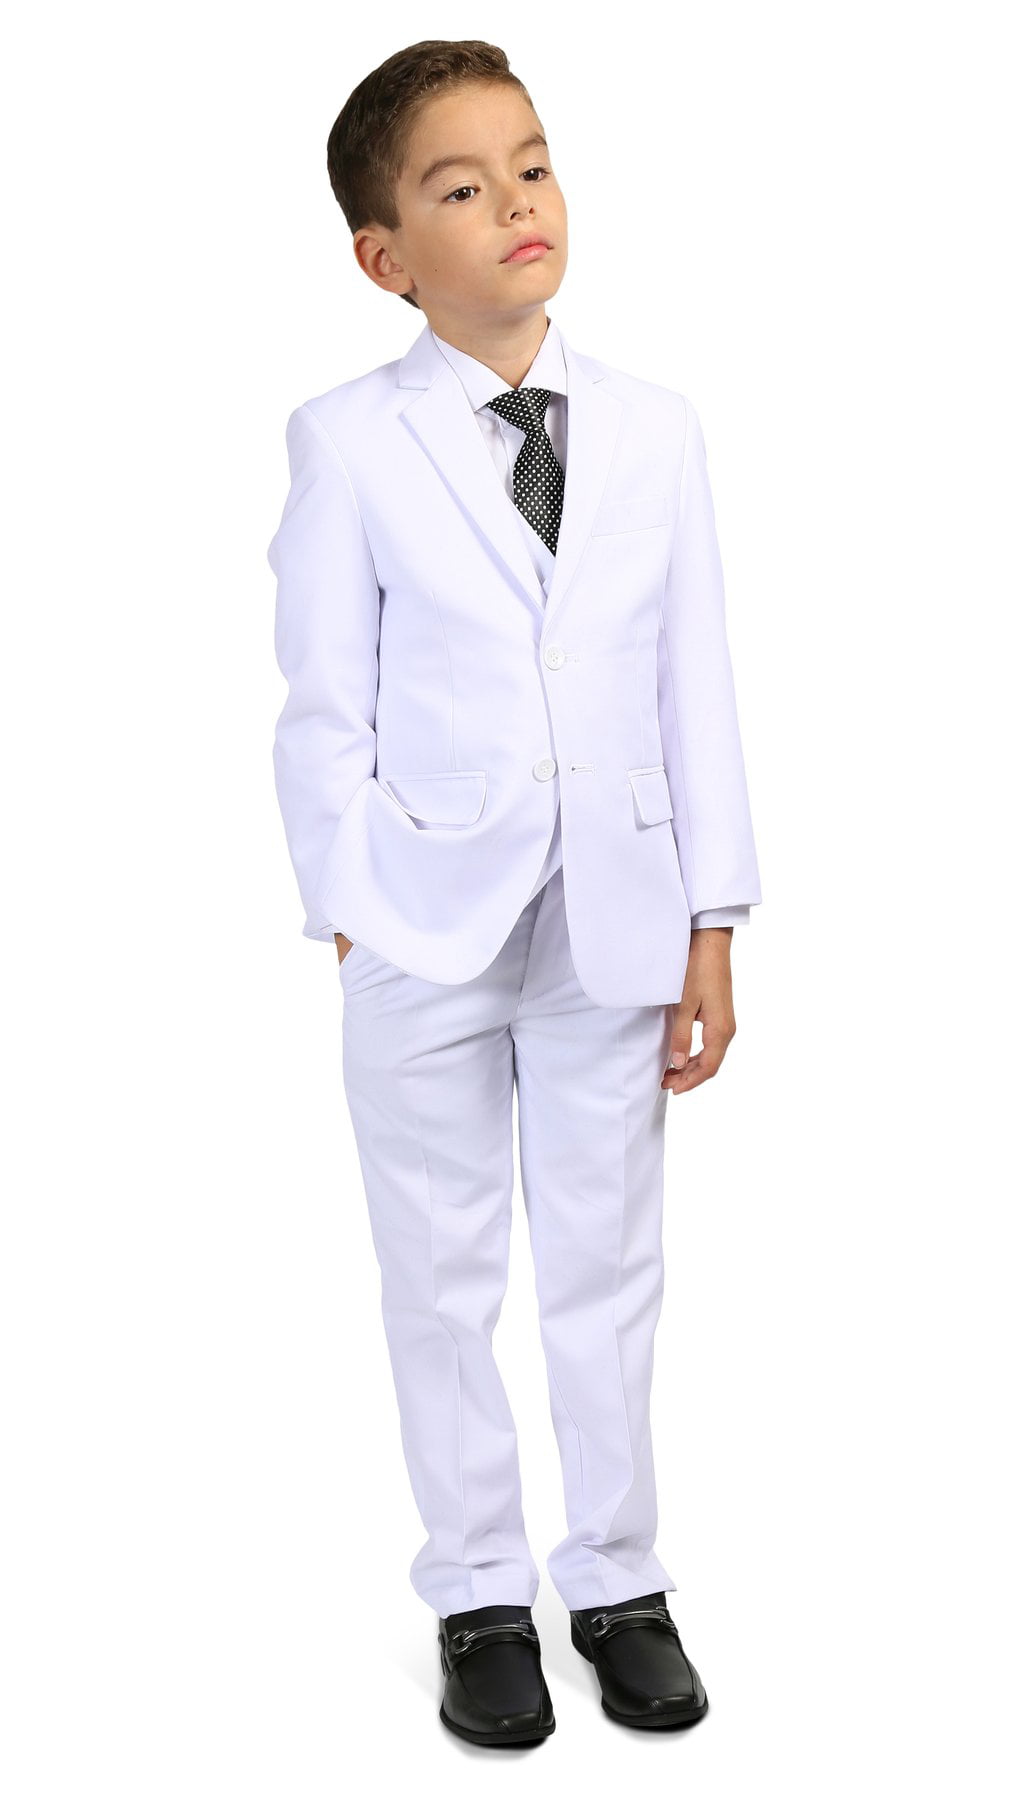 Silver 3Pc Tuxedo Suit,Tailored Fit Flat Front Pants By Alberto Nardoni Brand Designer